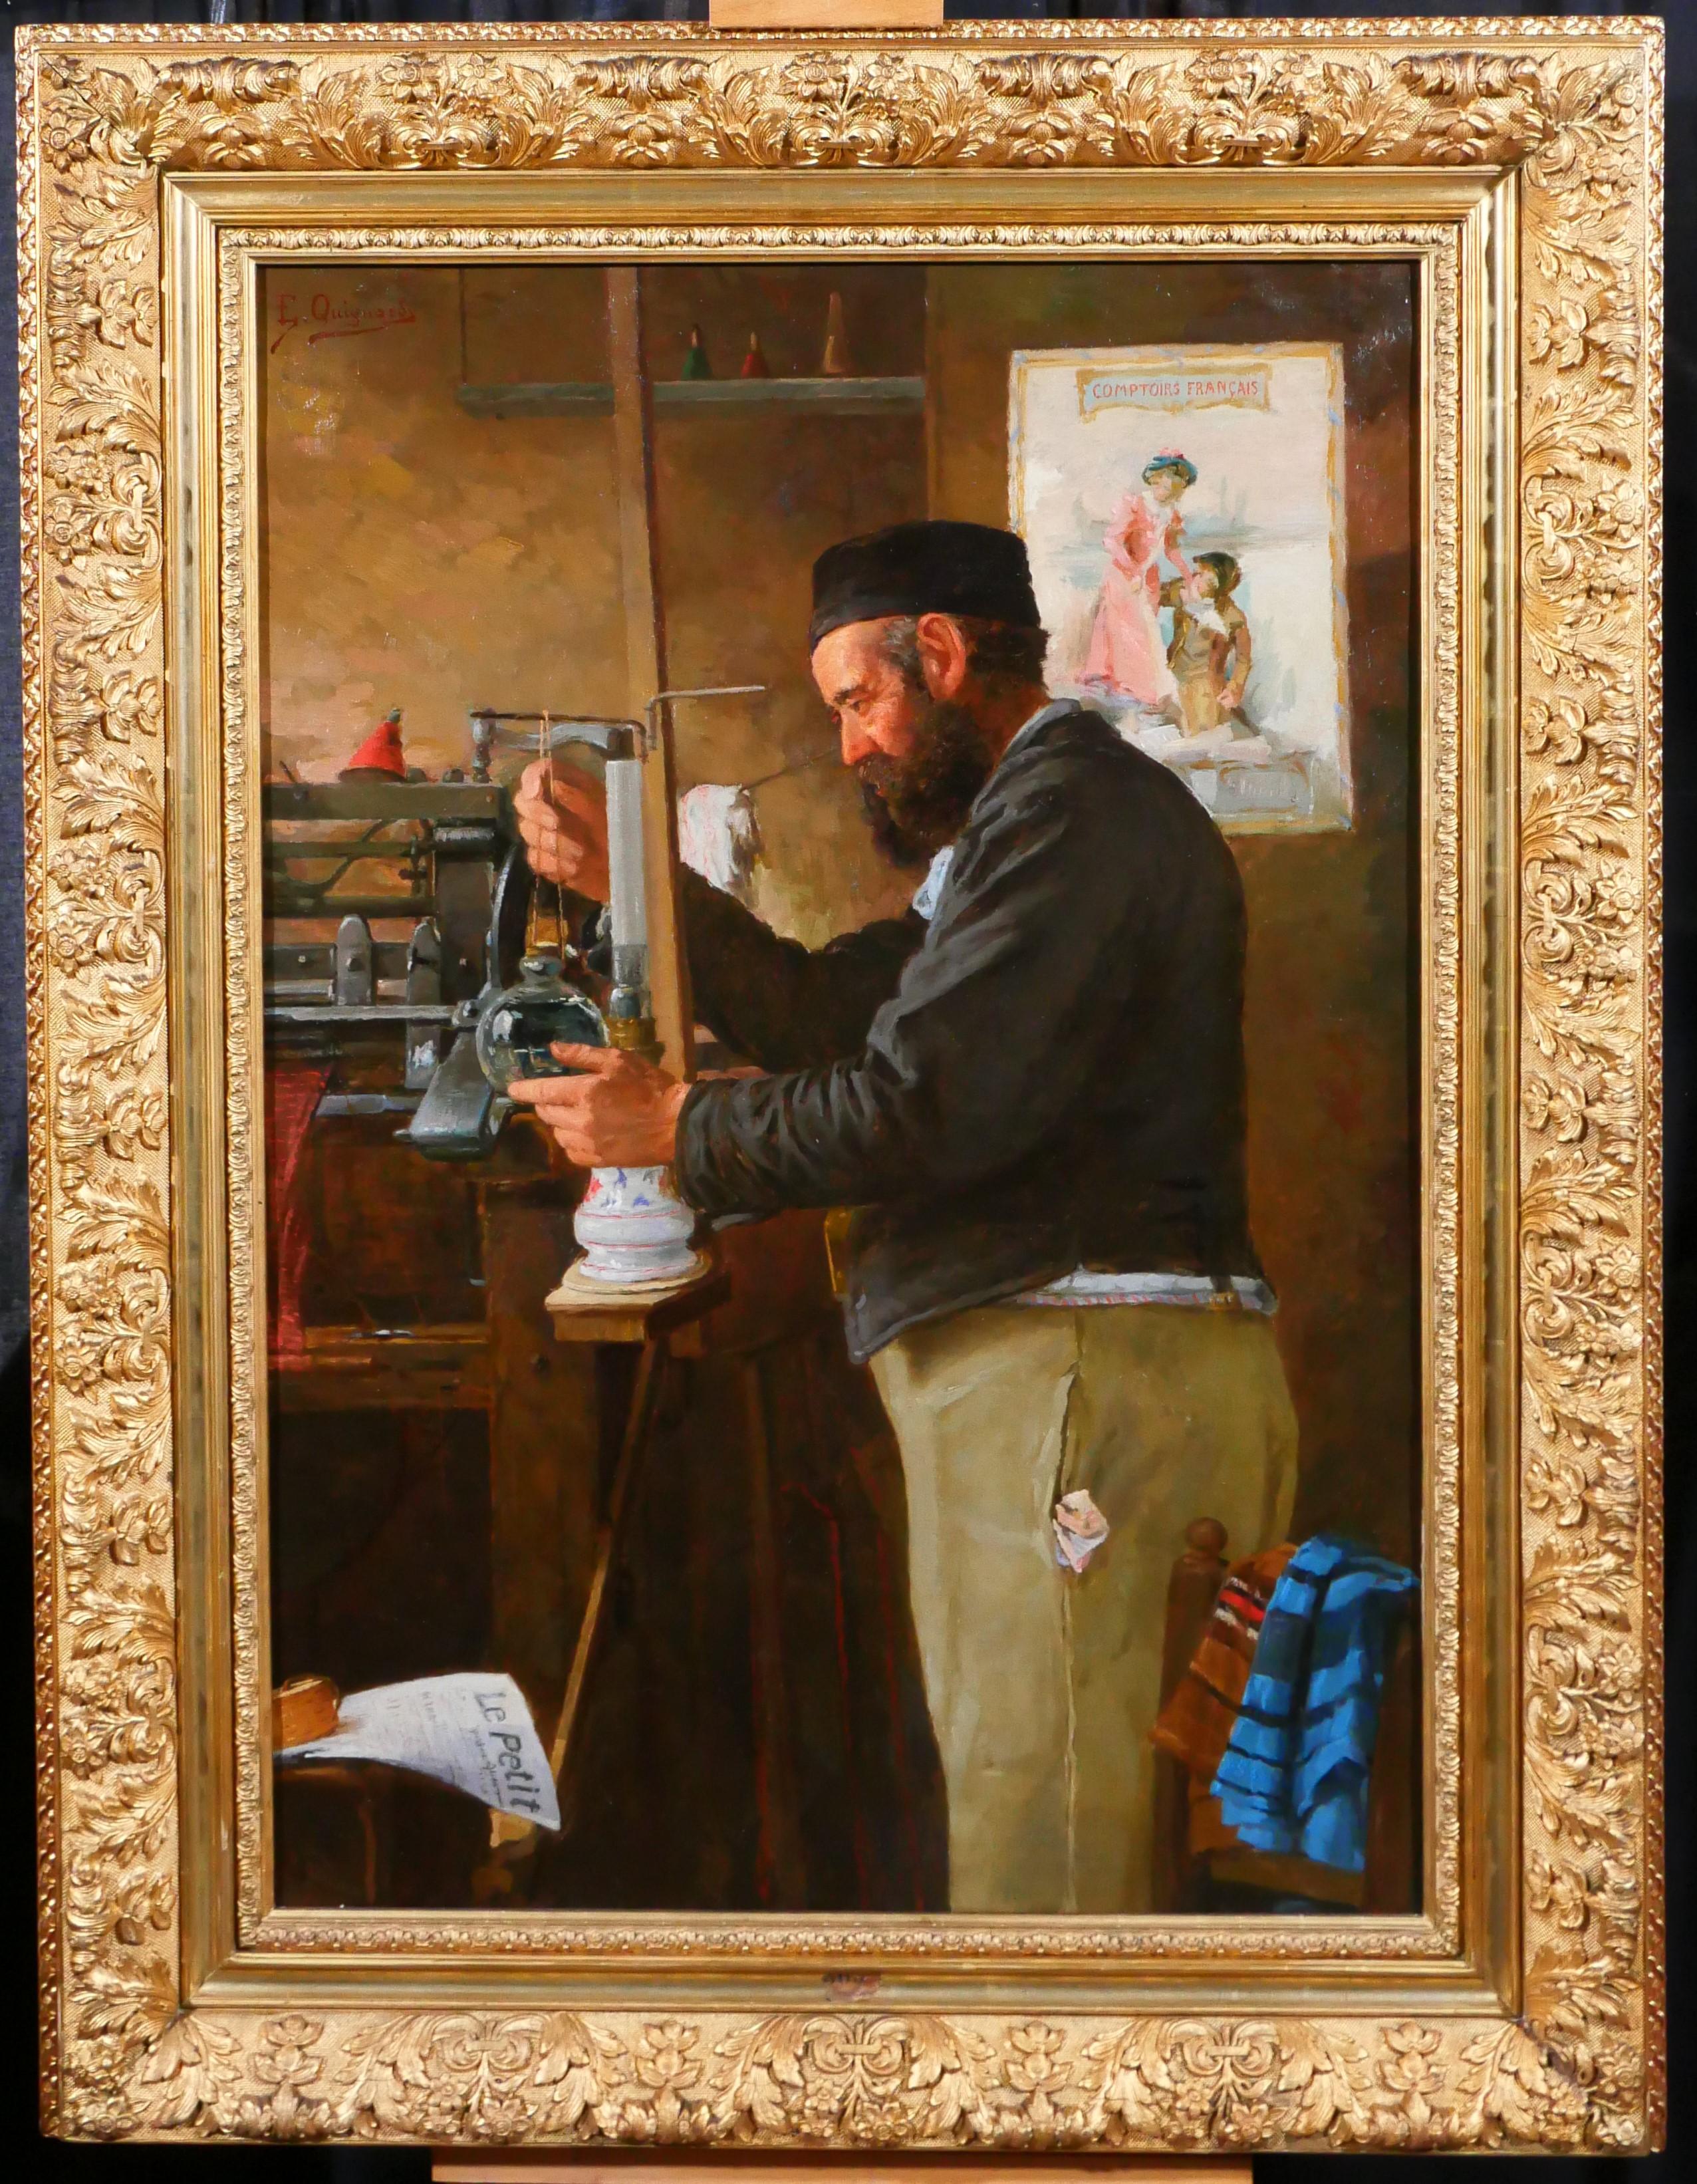 Weaver in his workshop - Painting by Edmond Quignard